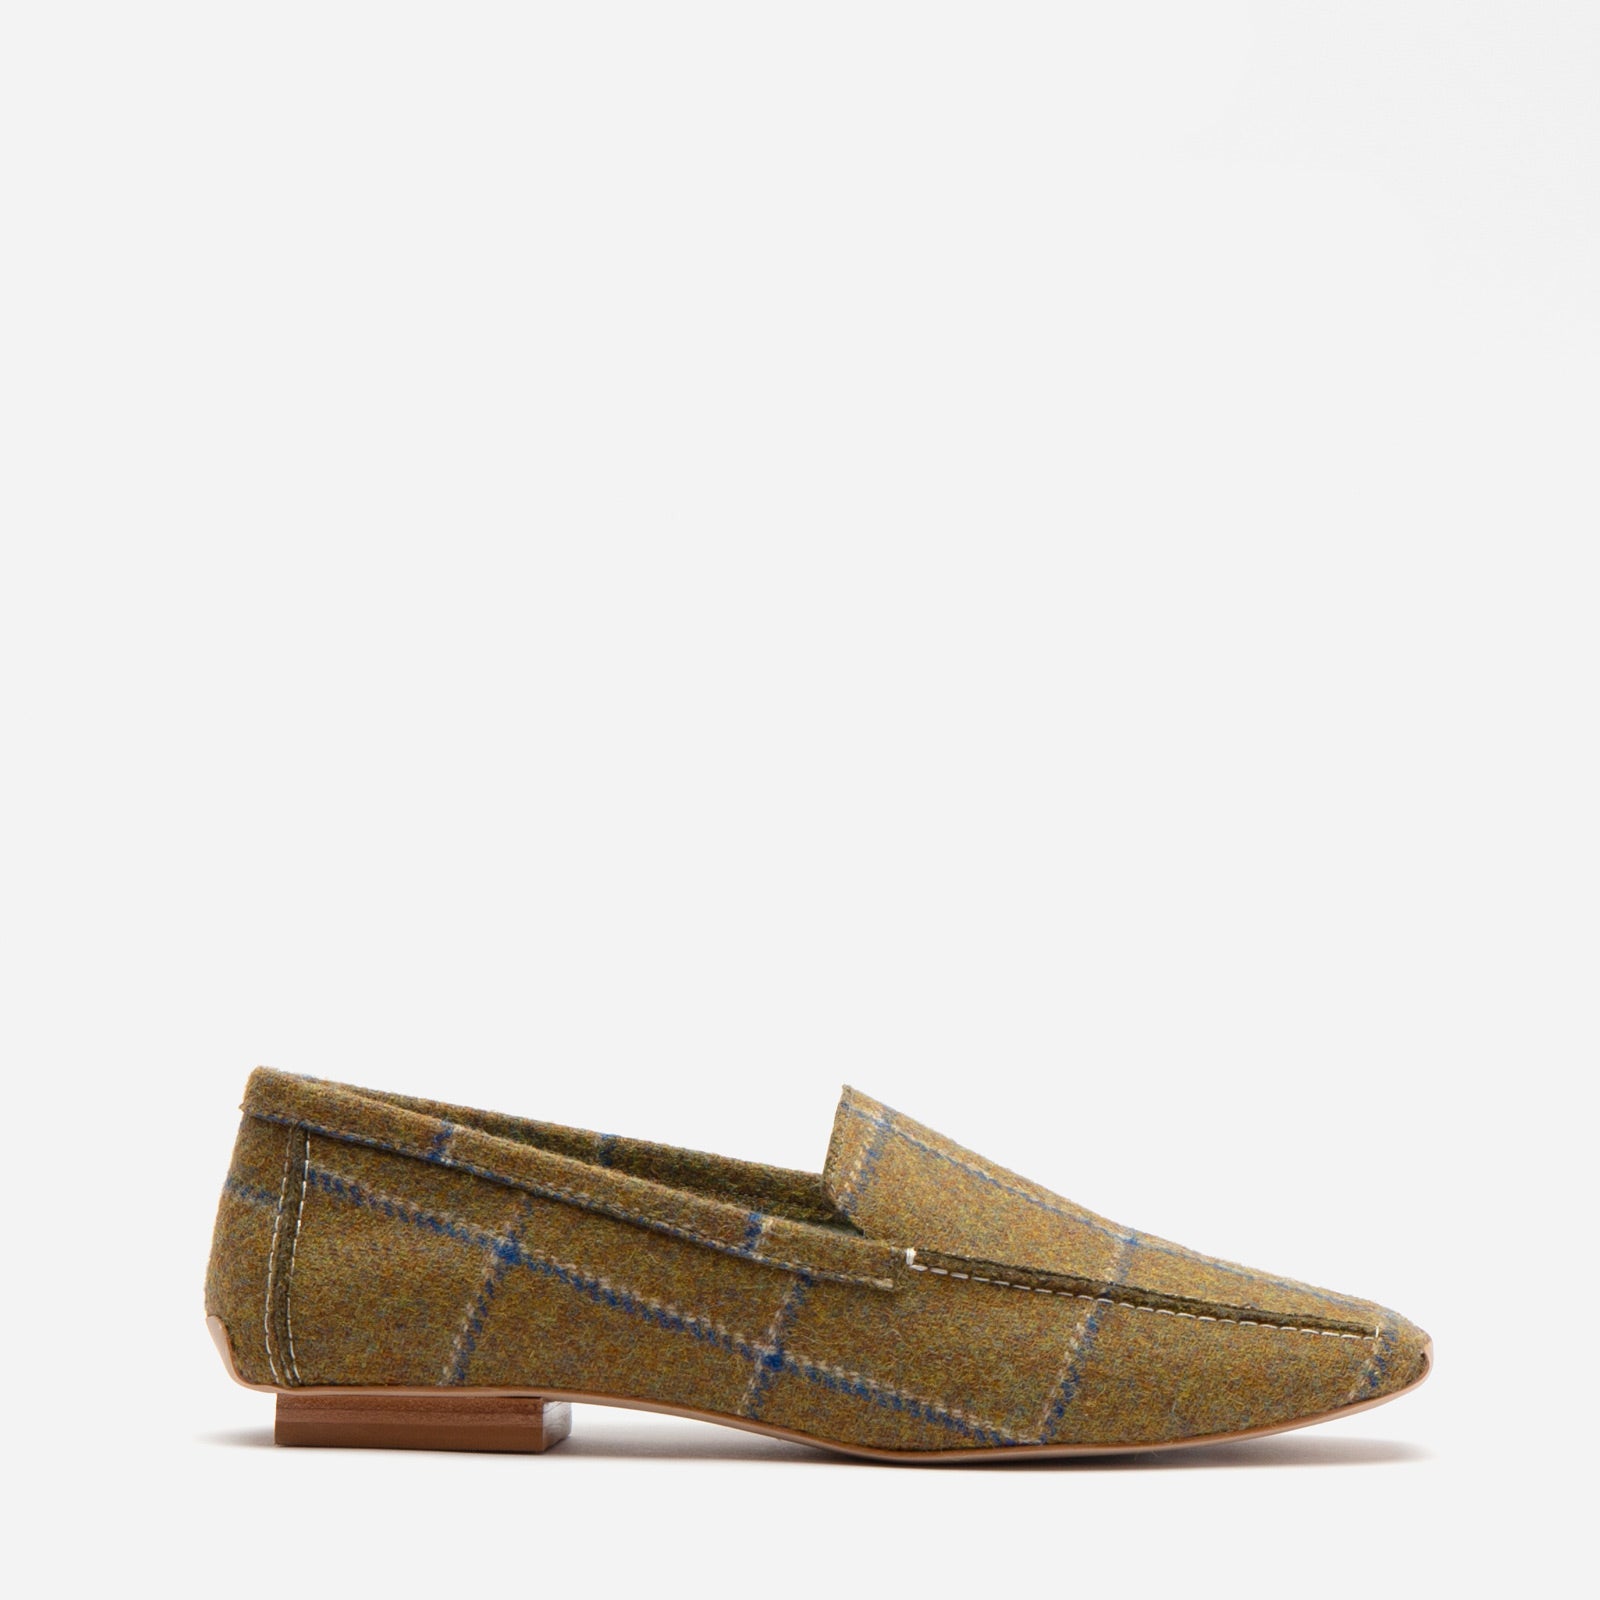 best selling loafers